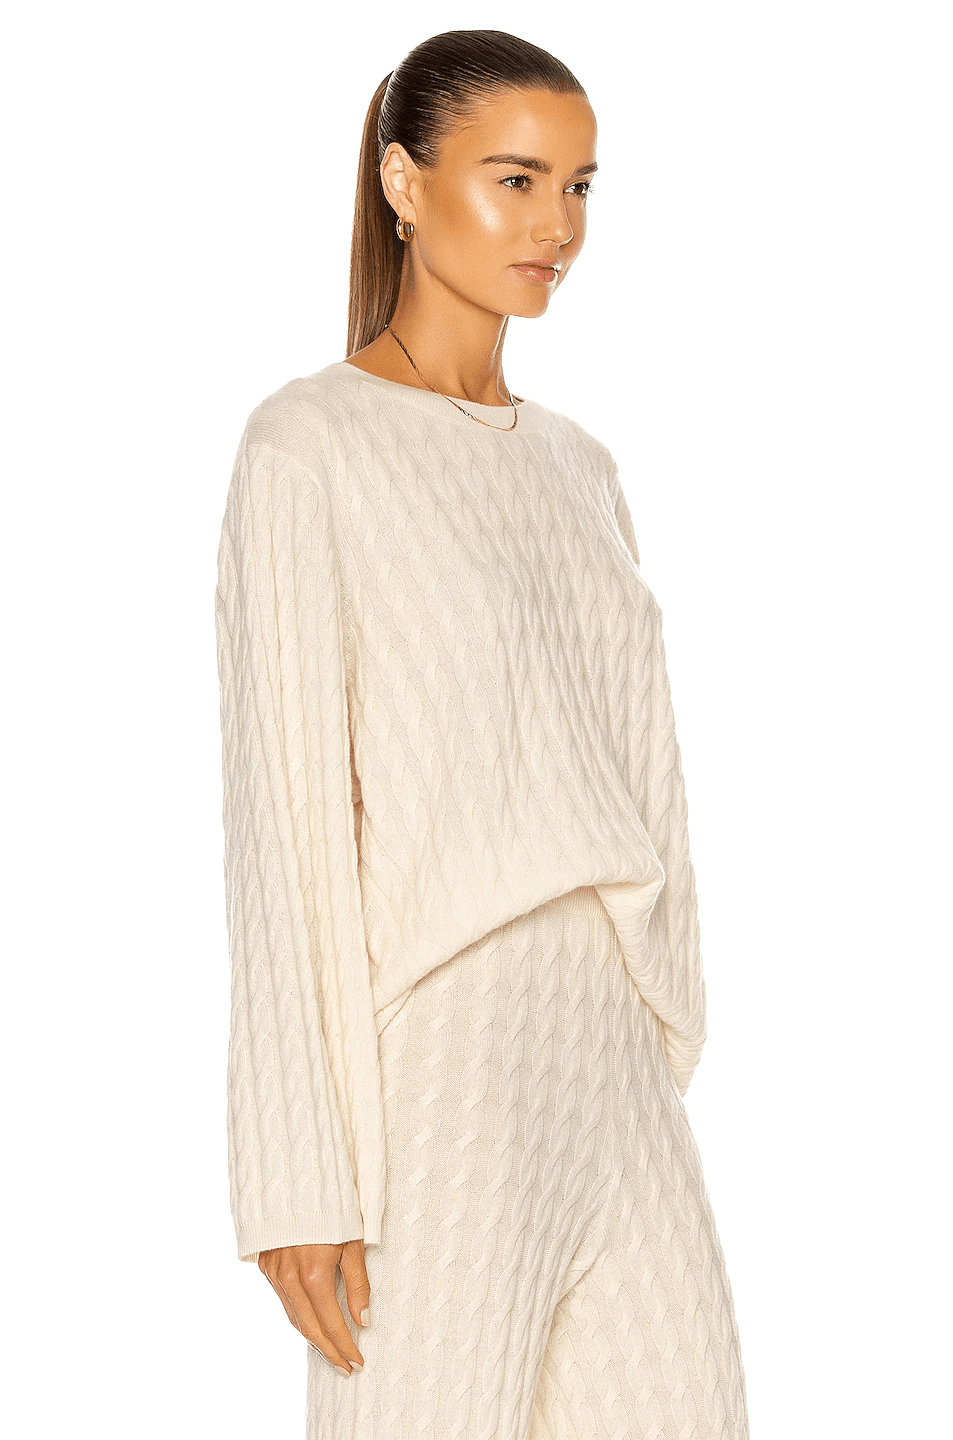 Toteme Cashmere Cable Knit Sweater